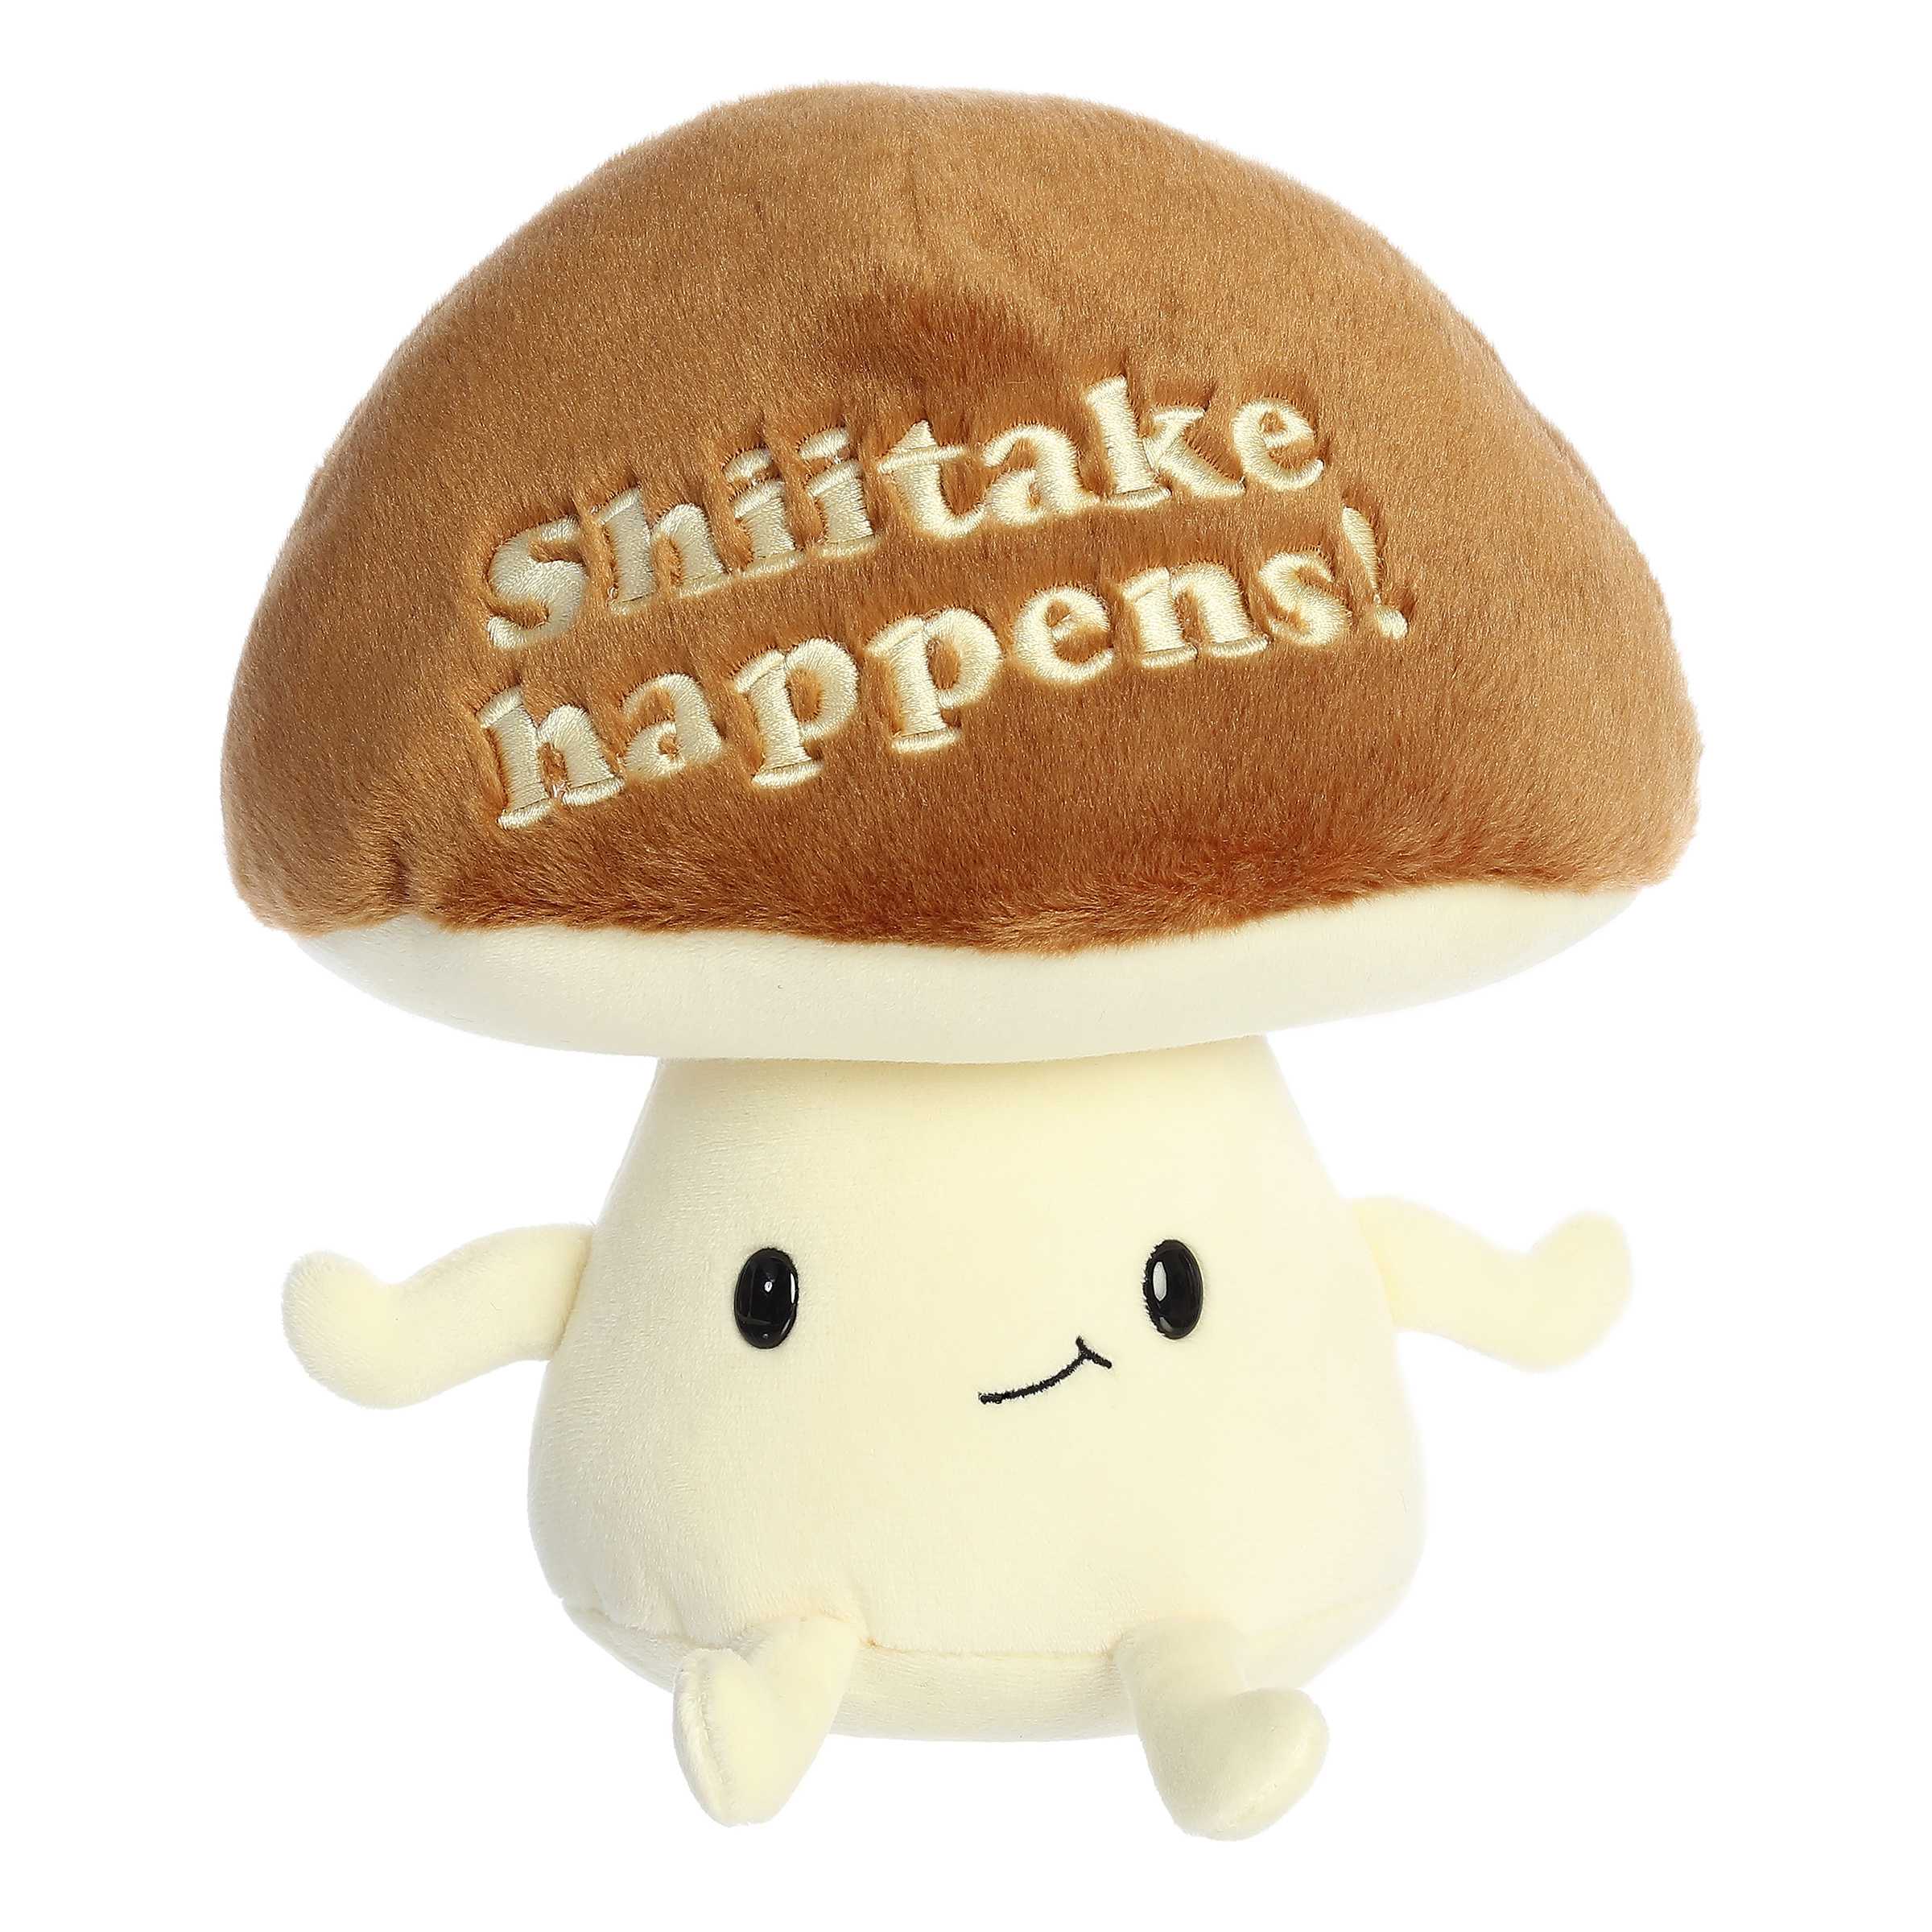 Shiitake mushroom plush from Just Sayin', soft and charming with a witty theme, ideal for hugs and laughs